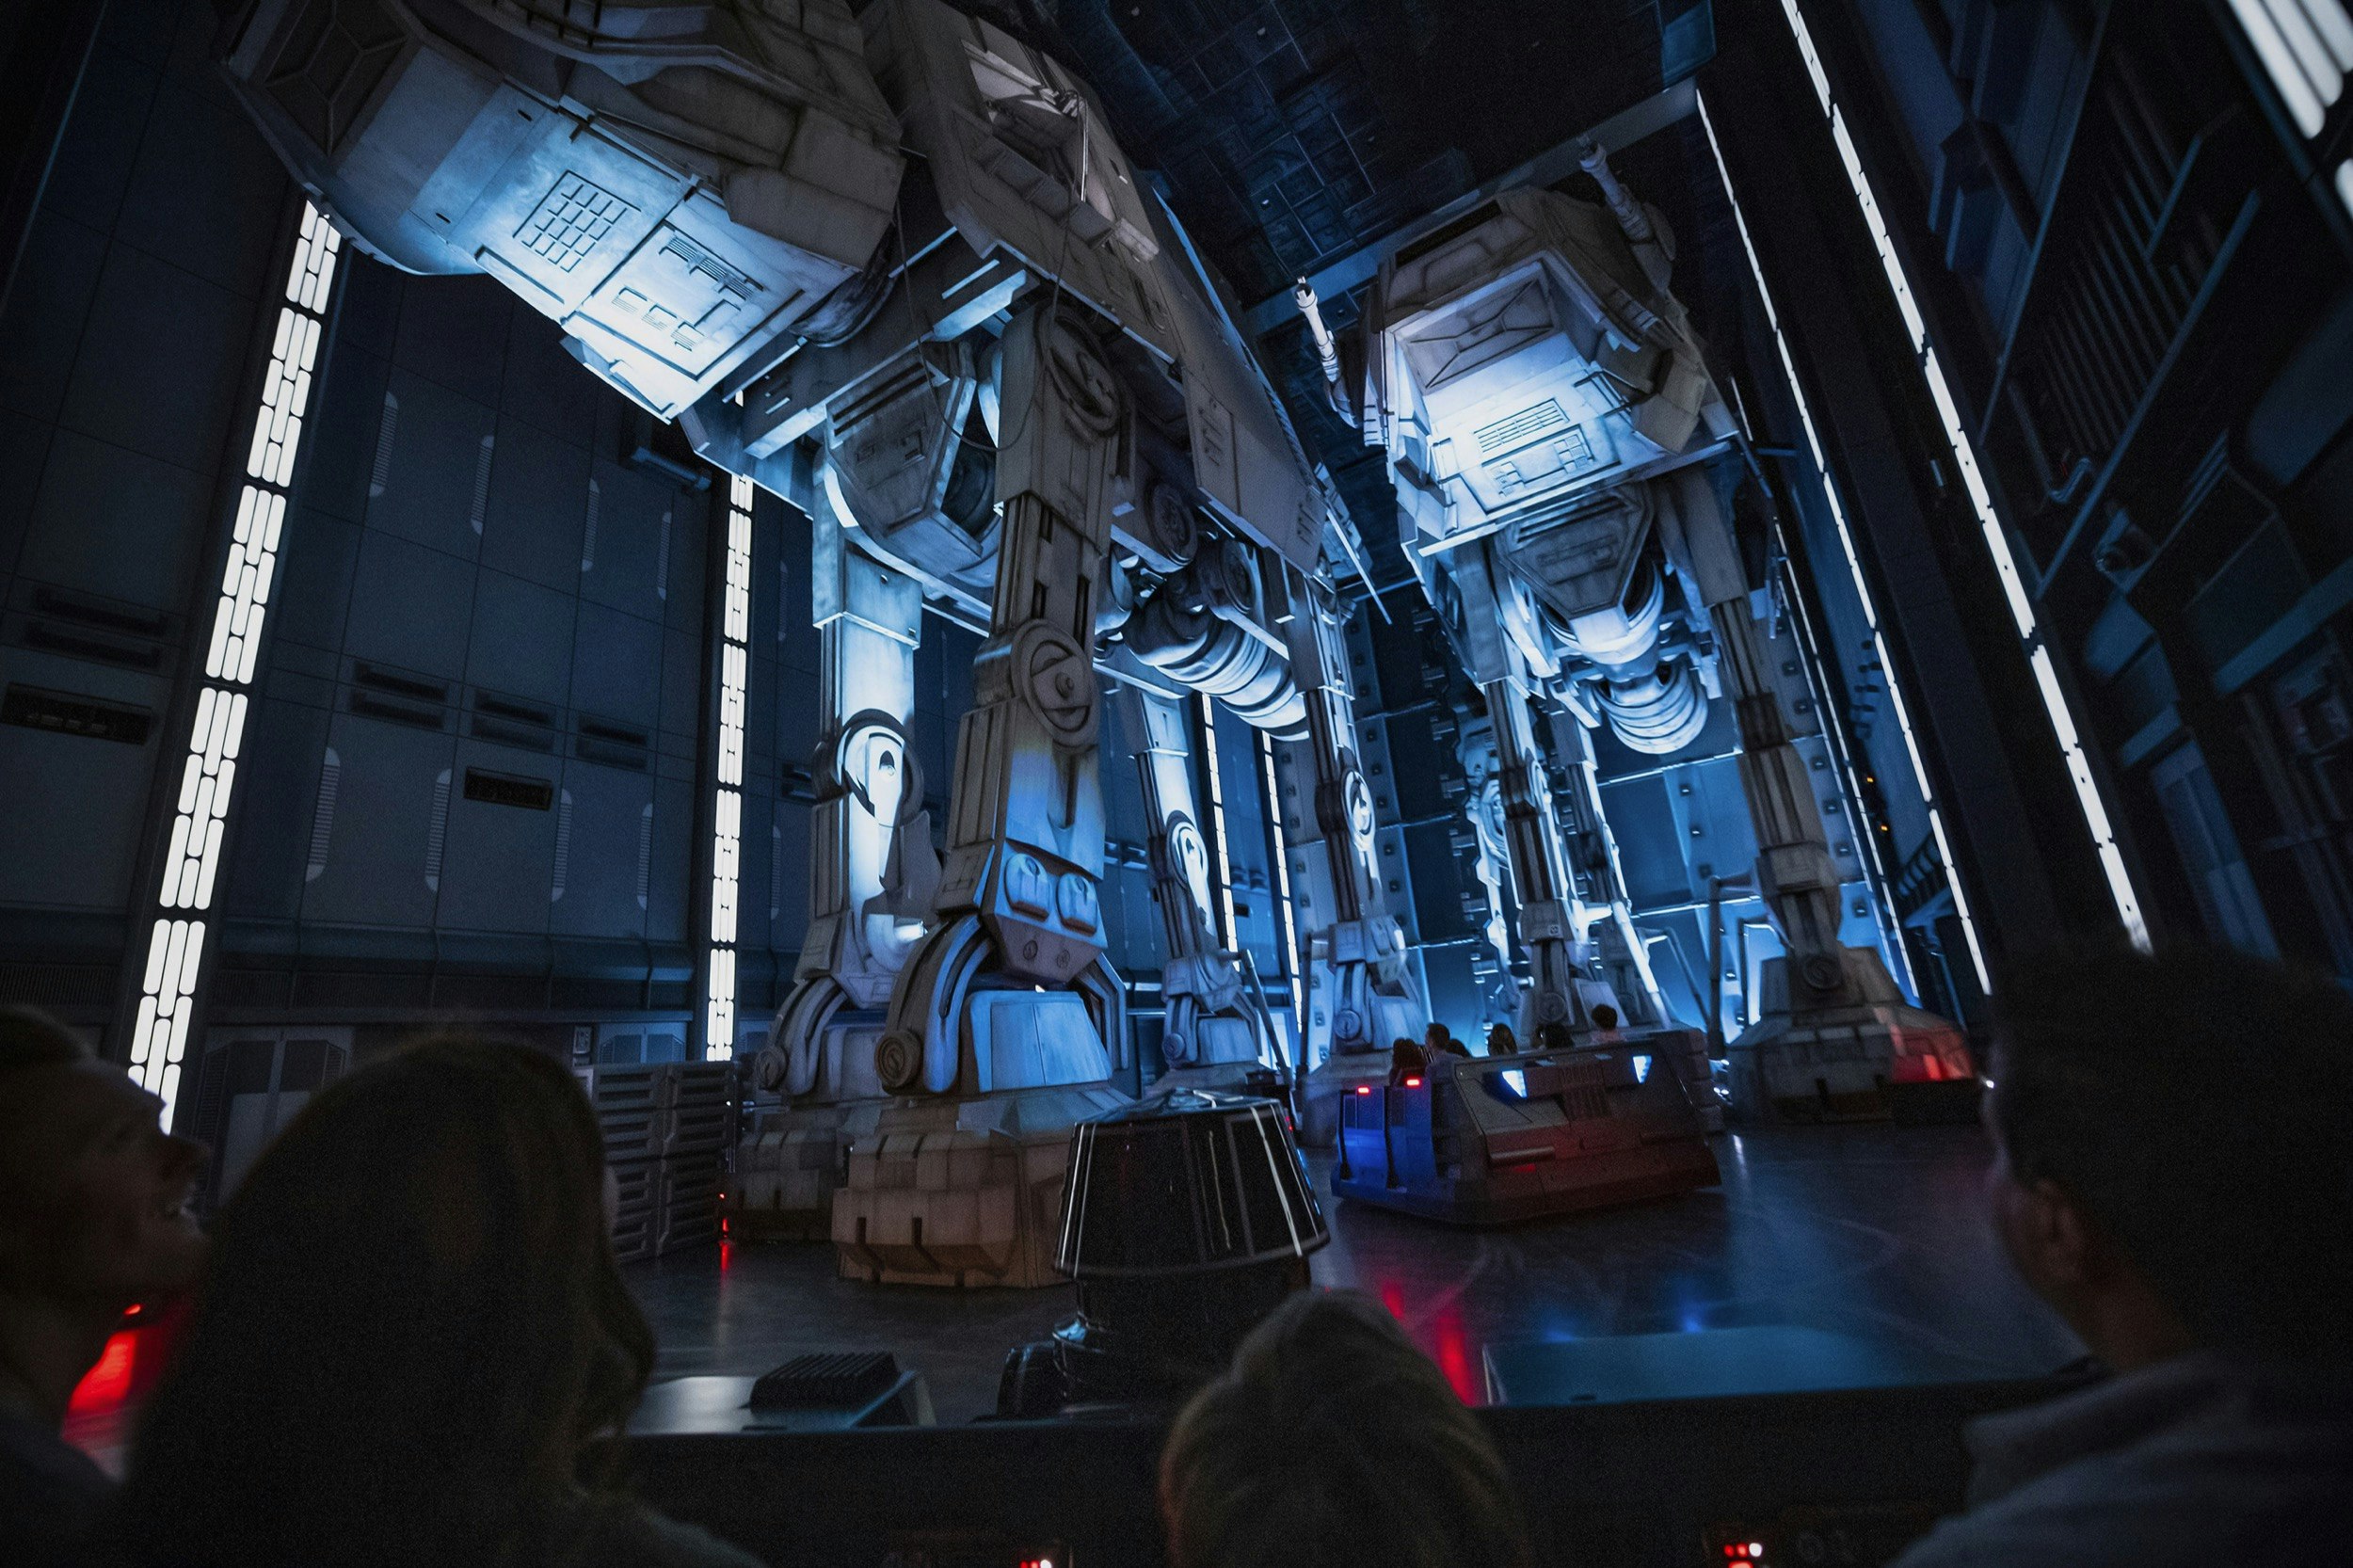 Guests race past massive AT-AT walkers aboard a First Order Star Destroyer as part of Star Wars: Rise of the Resistance 